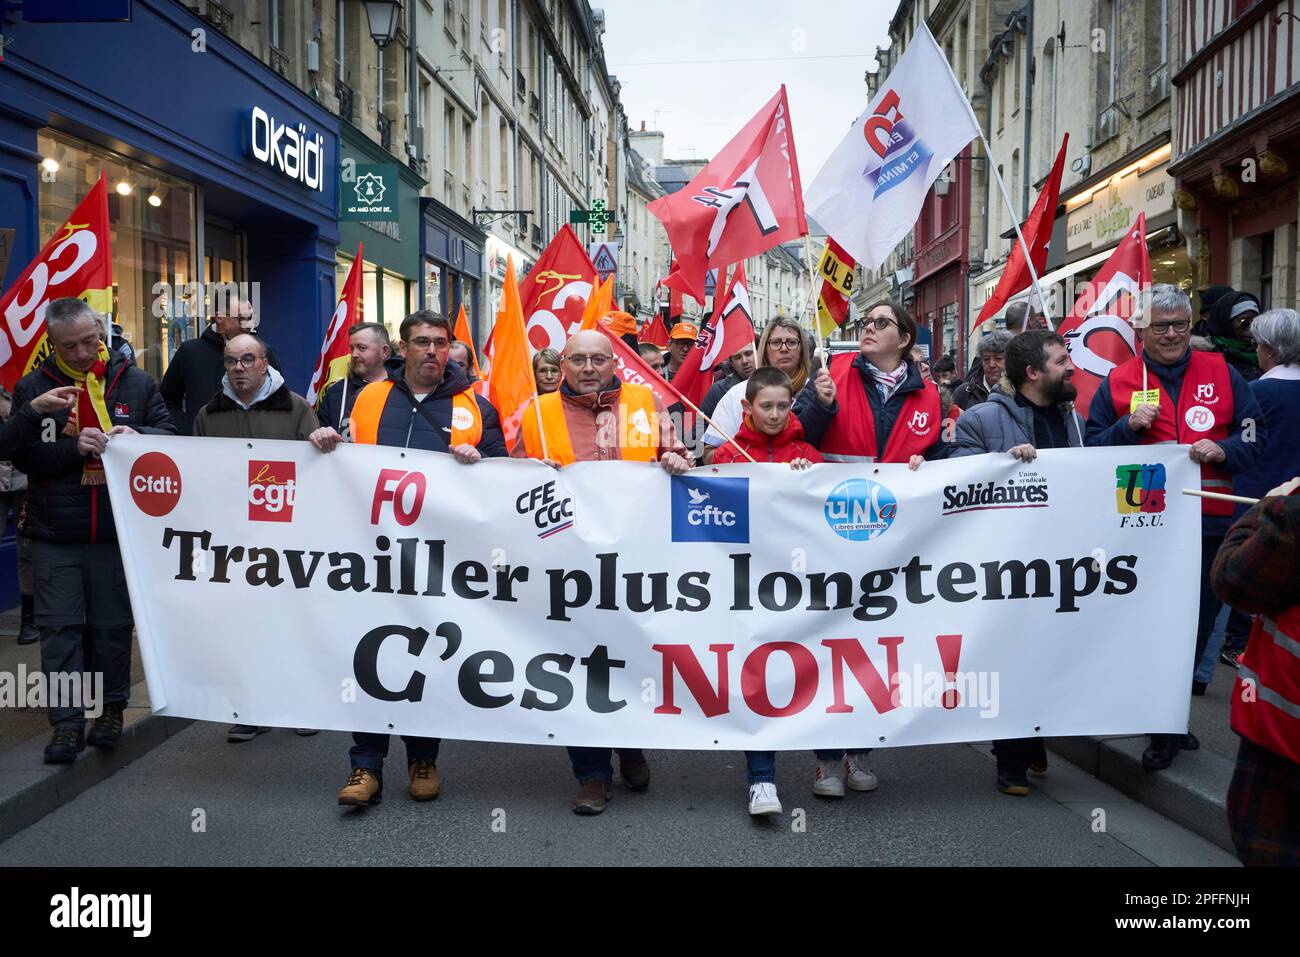 A demonstration in Bayeux, France against the raising of the retirement age to 64. The banner translates as 'To work longer - it's NO!' Stock Photo